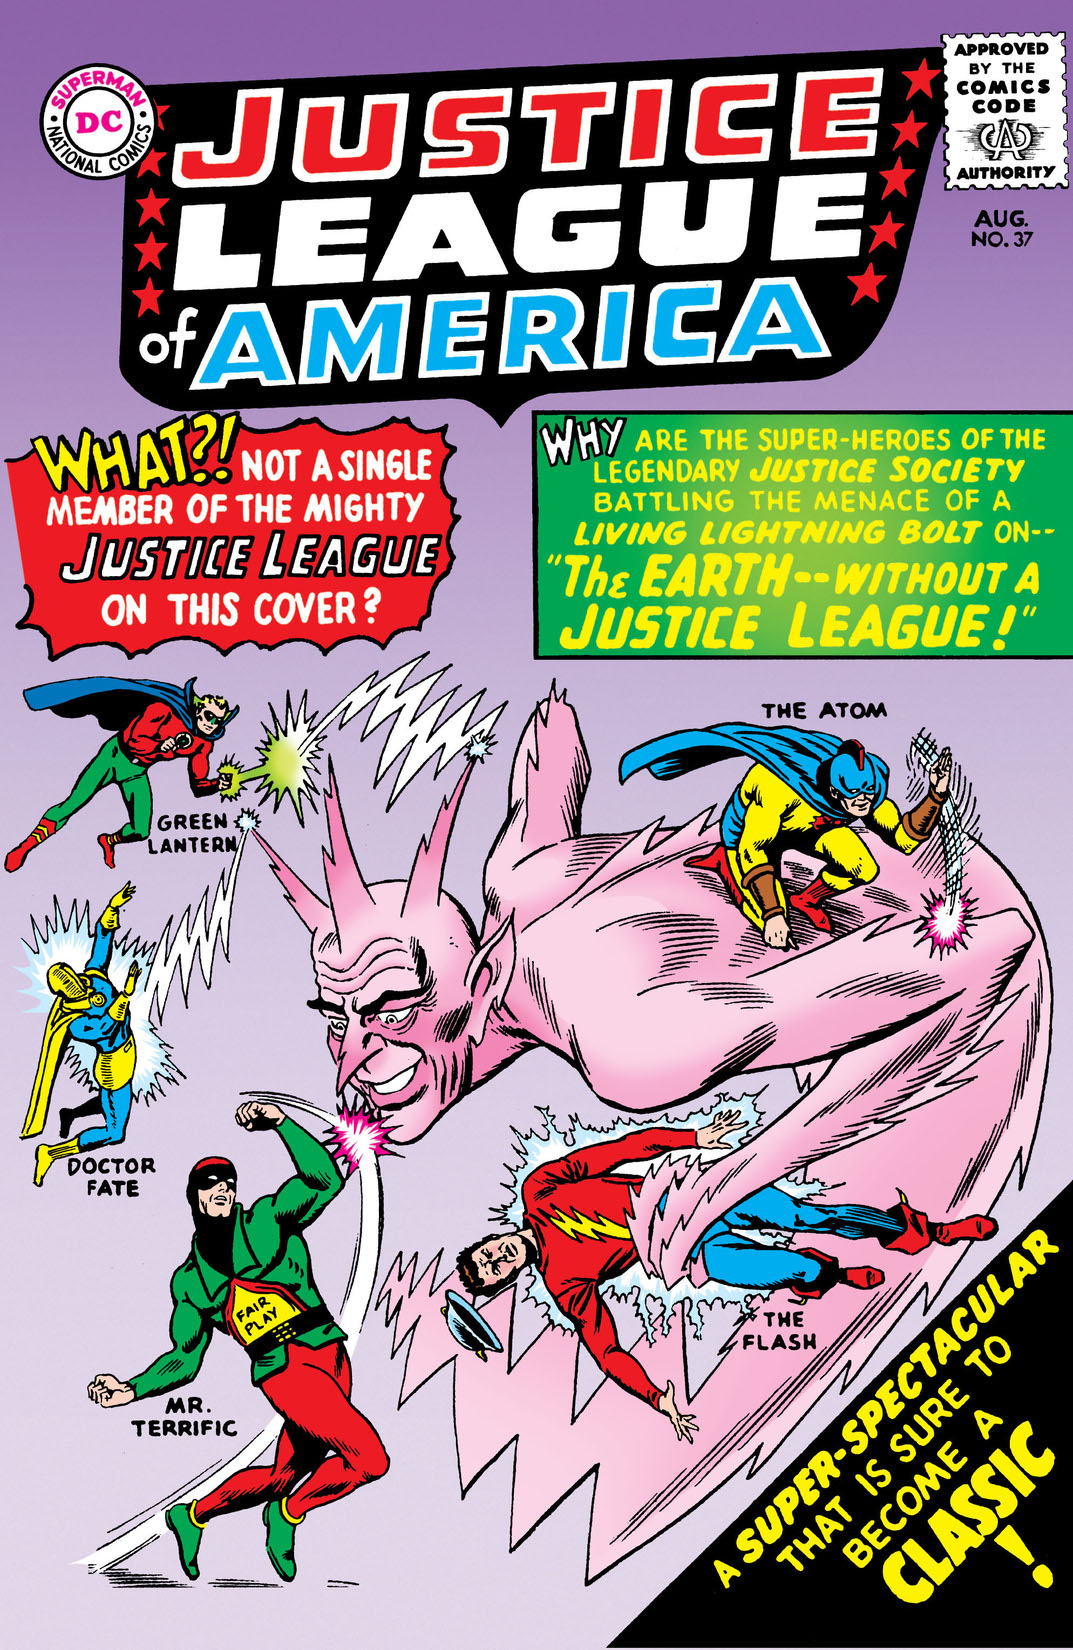 Justice League of America (1960-) #37 preview images